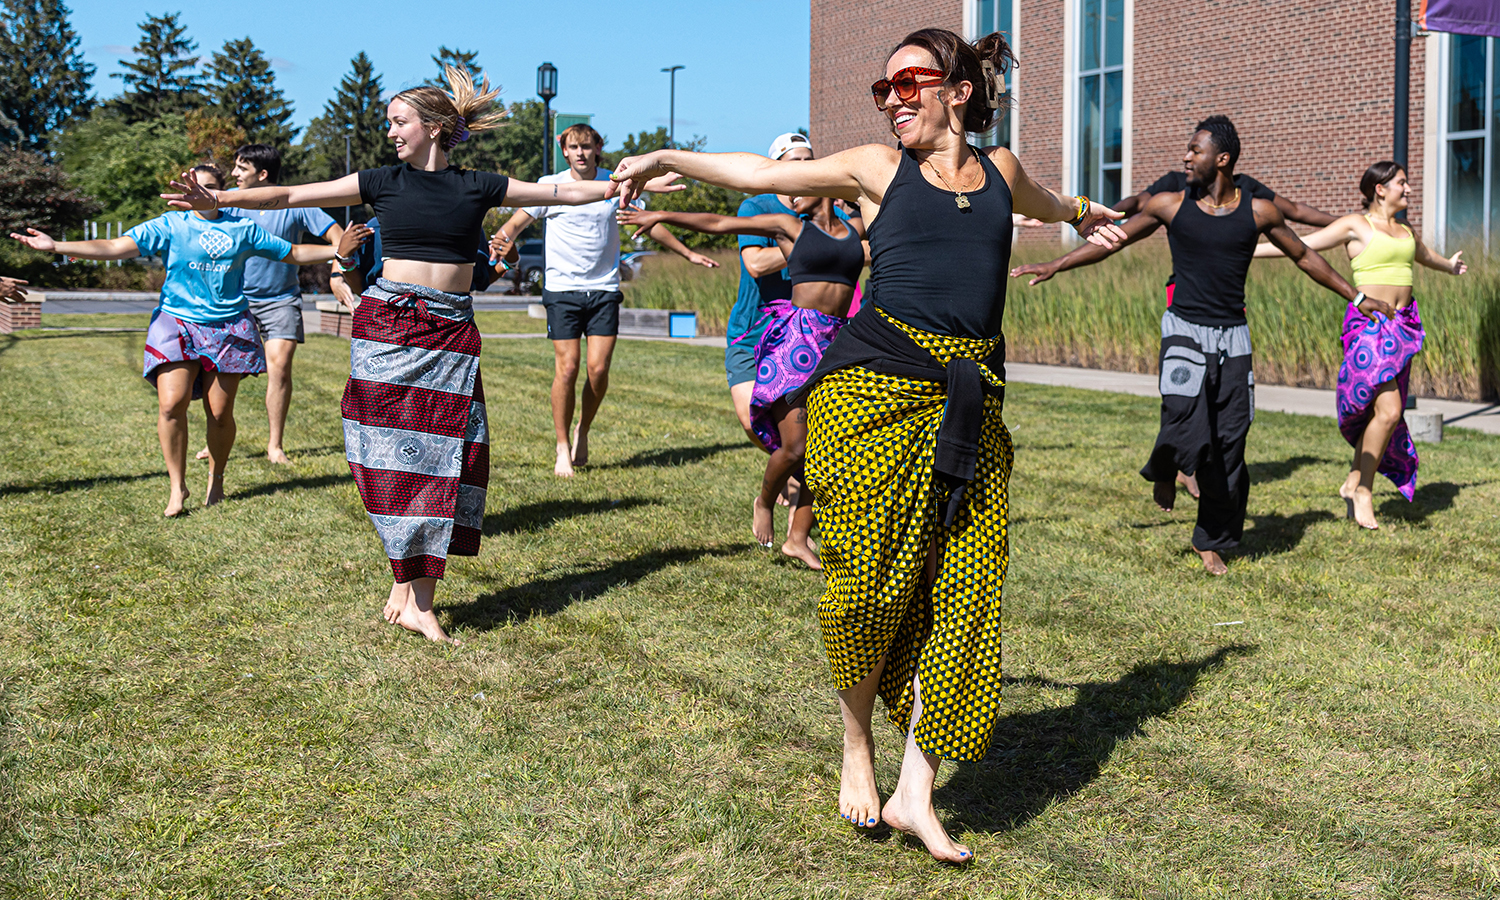 Associate Professor of Dance and Movement Studies Kelly Johnson leads students in “Intro to Jamaican Dance” outside of the Gearan Center for the Performing Arts.